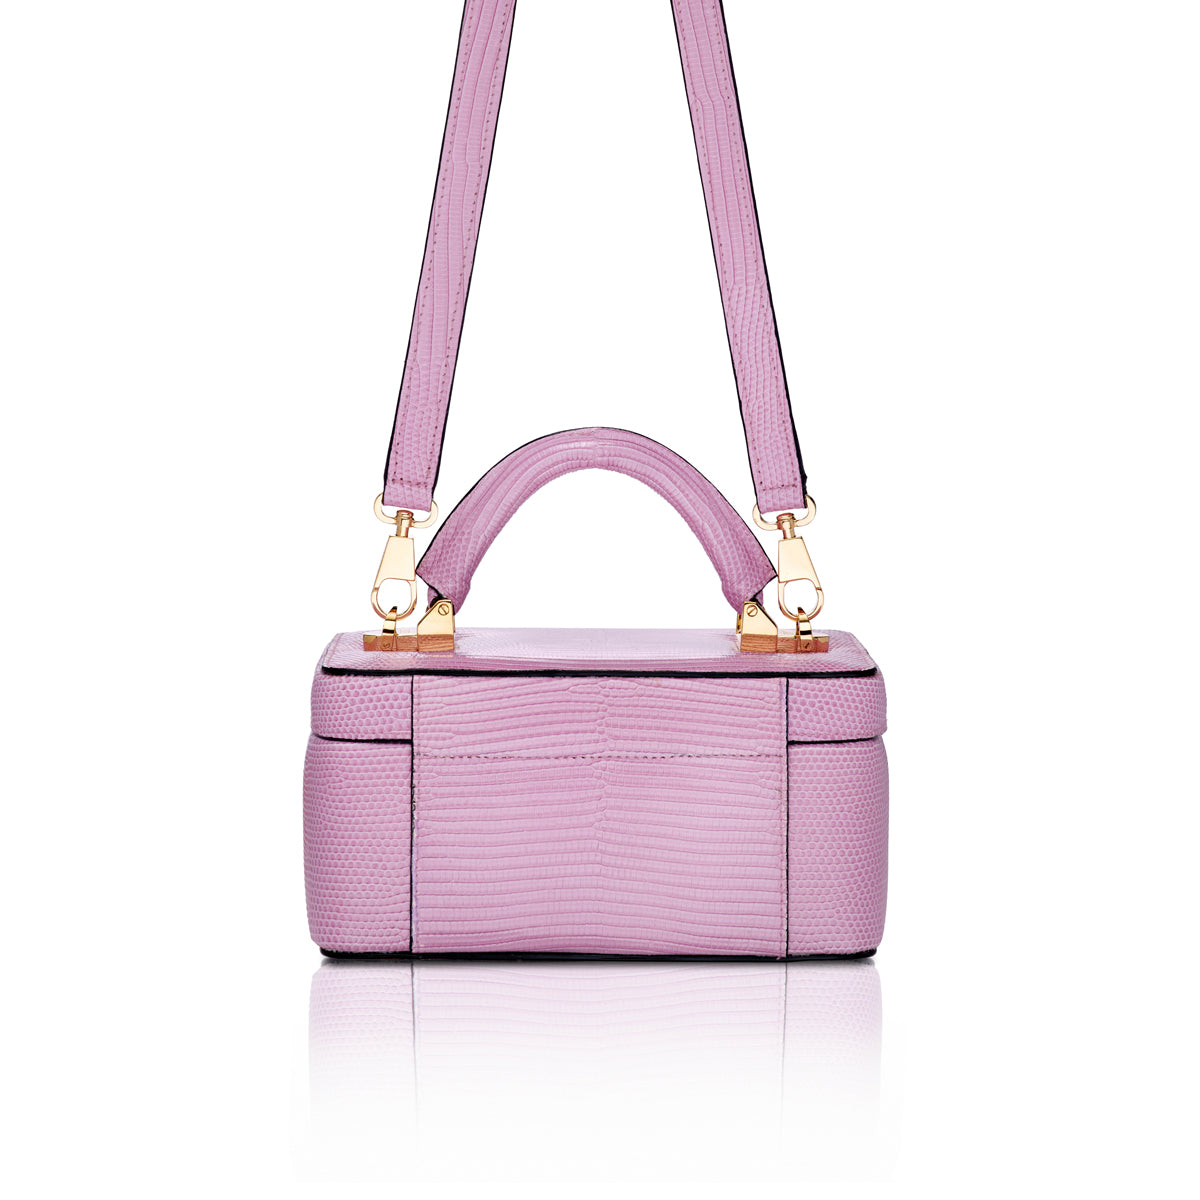 STALVEY Beauty Case in Lilac Lizard Front View